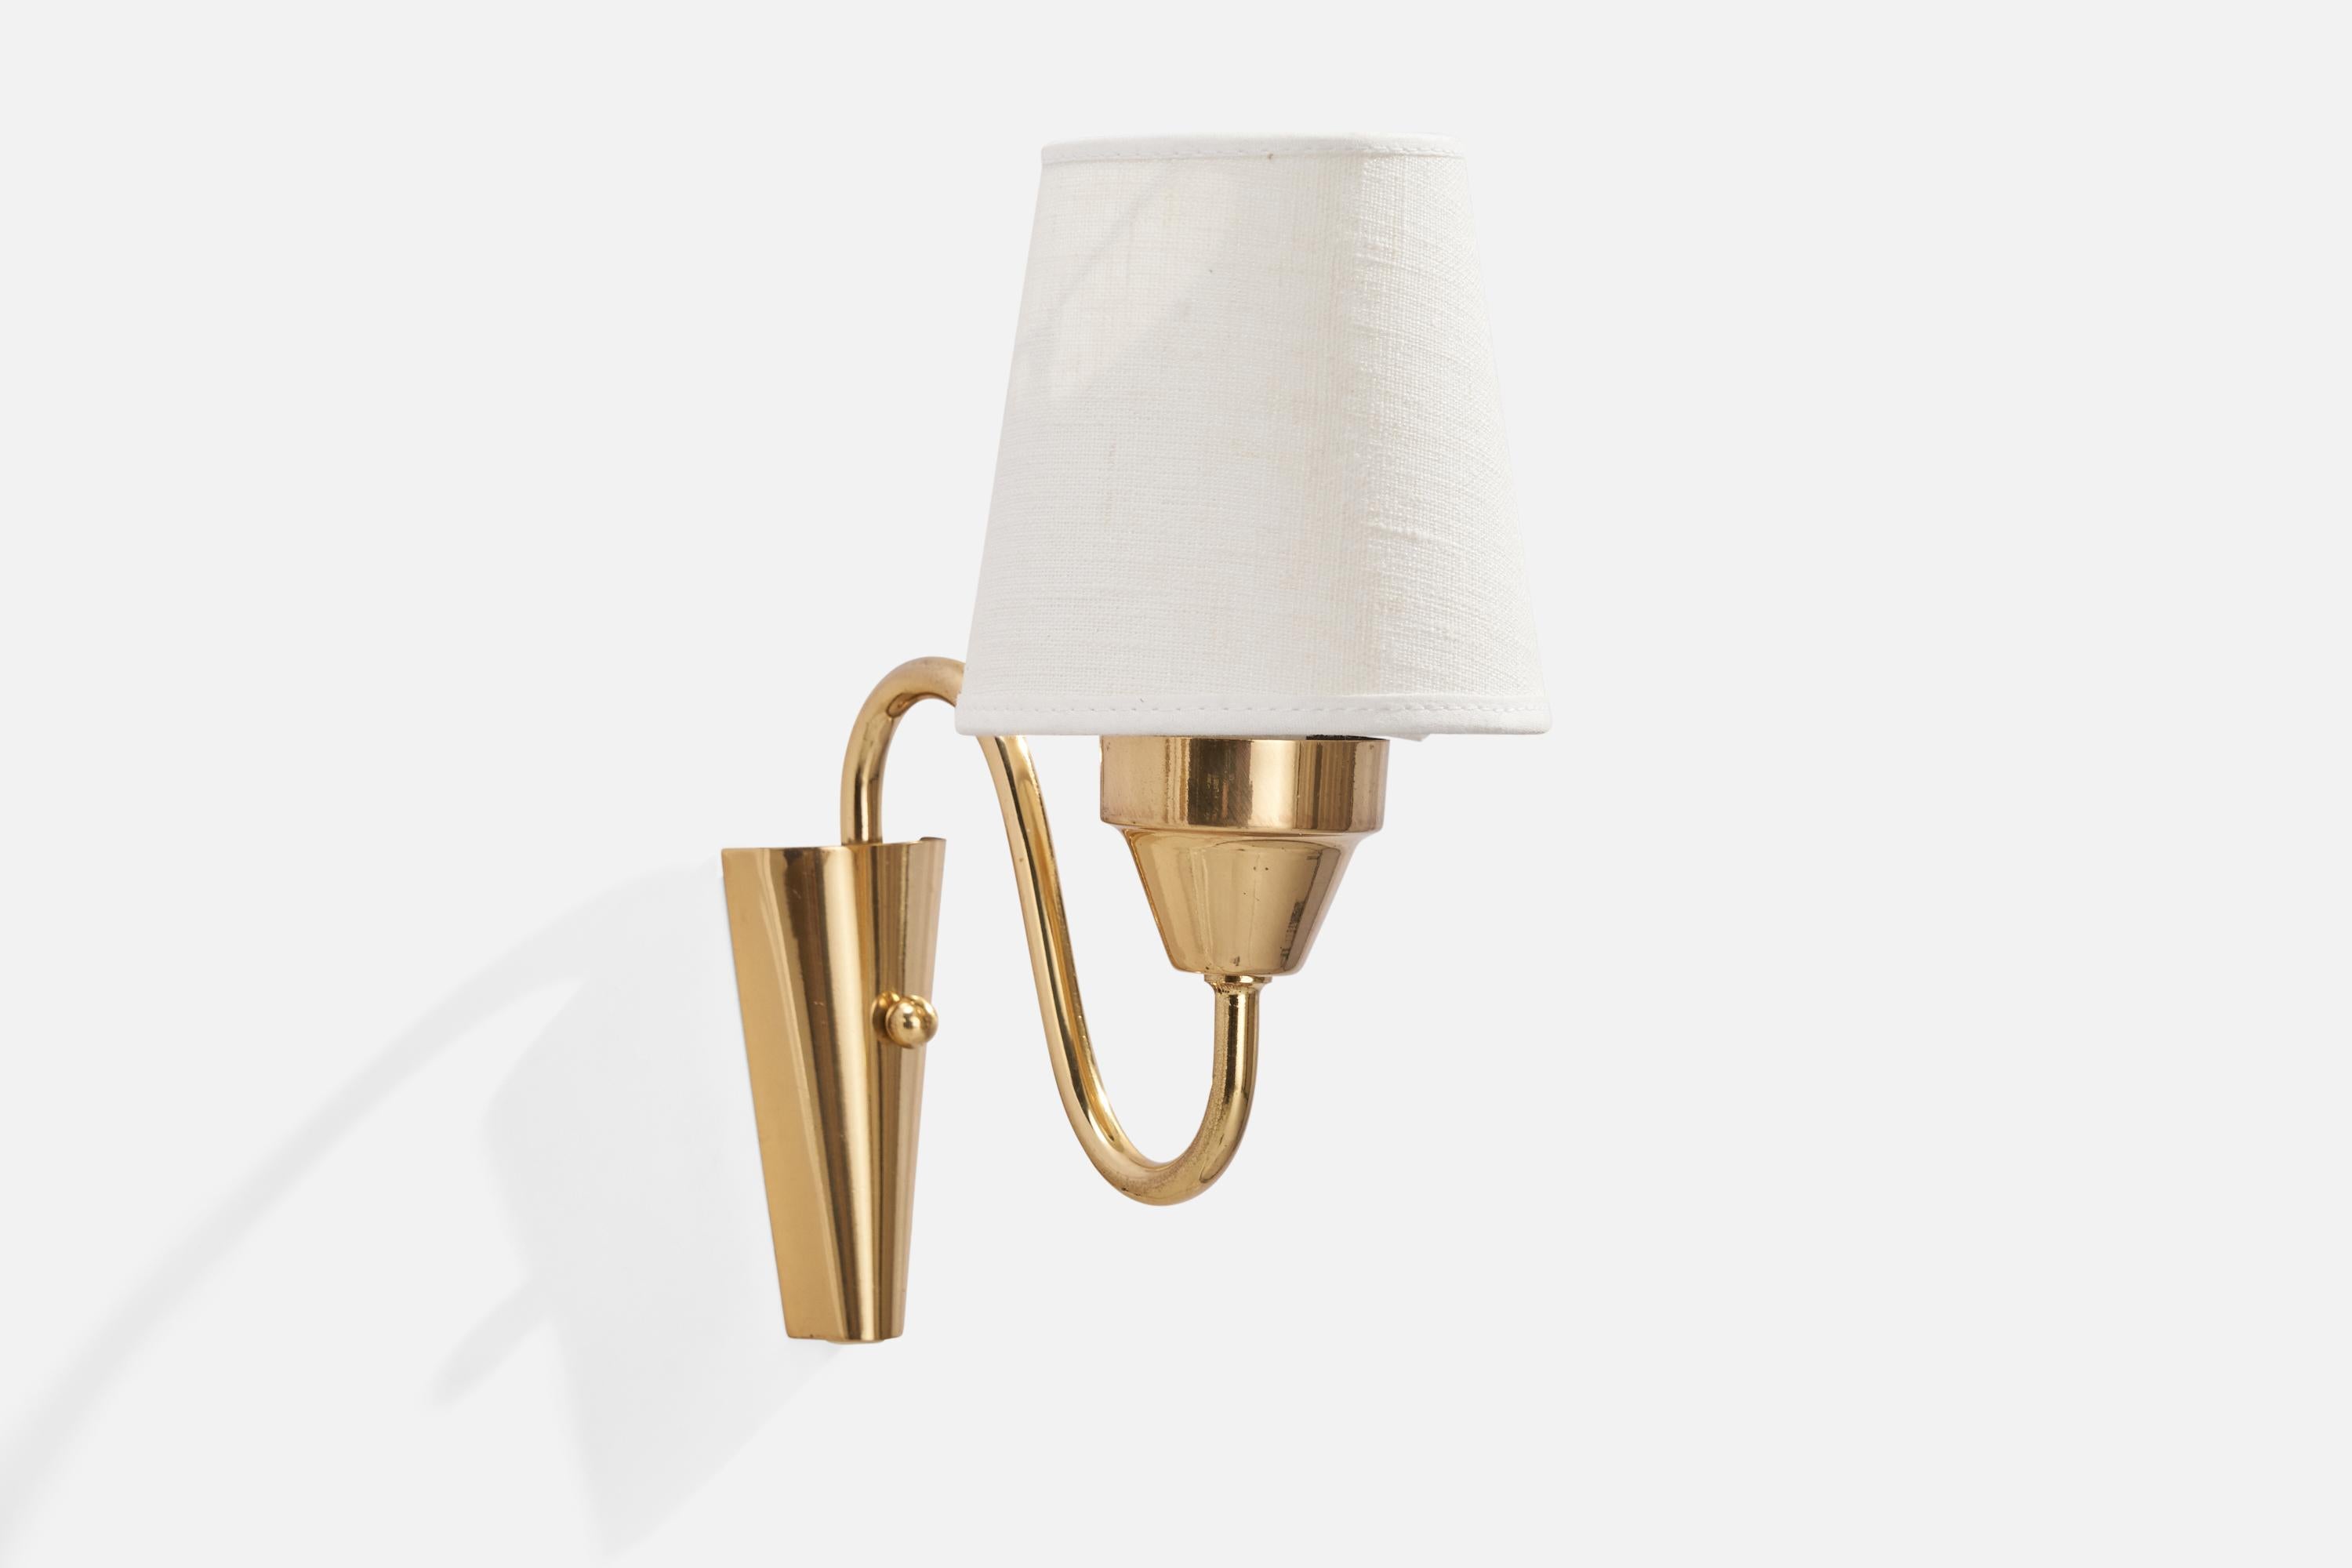 Mid-20th Century Falkenbergs Belysning, Wall Lights, Brass, Fabric, Sweden, 1960s For Sale